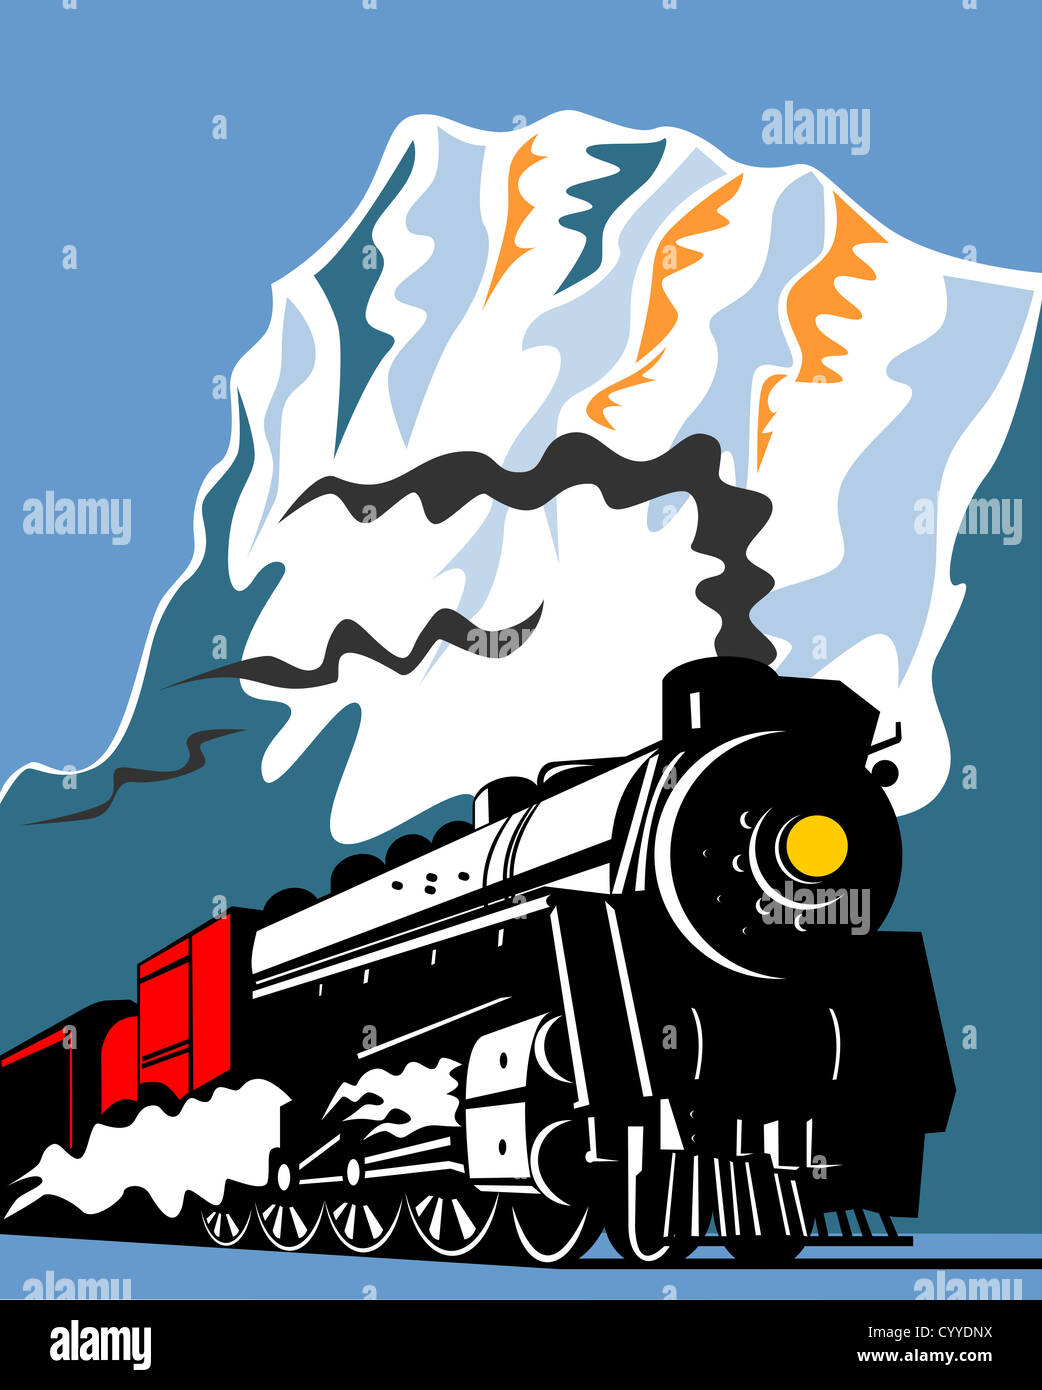 Illustration of a steam train locomotive coming up on railroad done in retro woodcut style Stock Photo